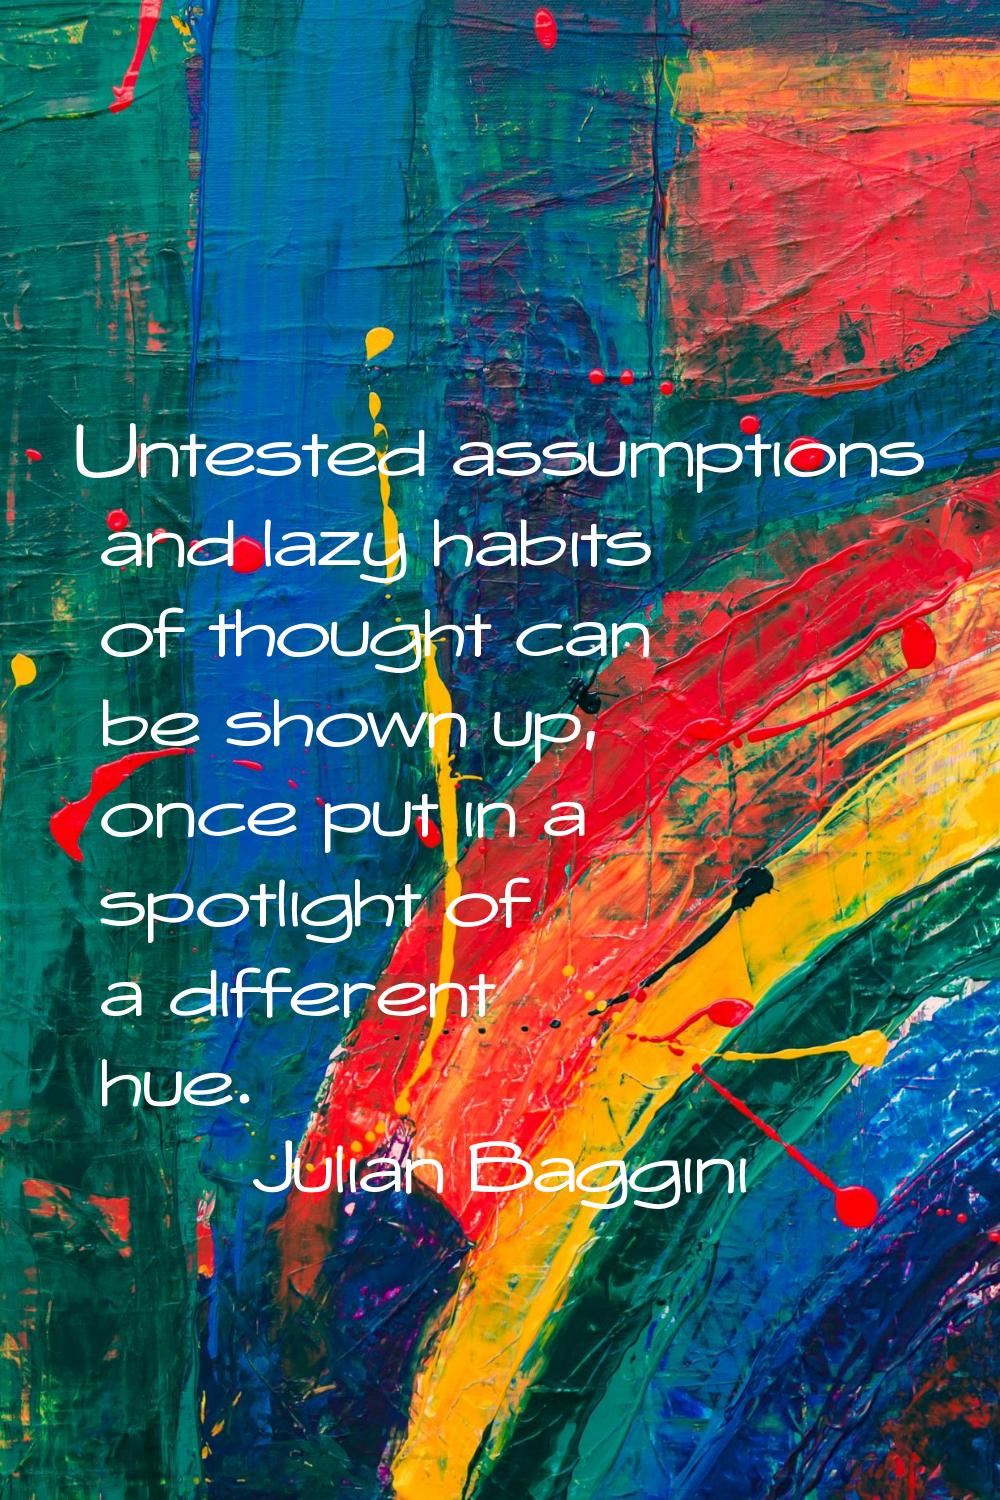 Untested assumptions and lazy habits of thought can be shown up, once put in a spotlight of a diffe